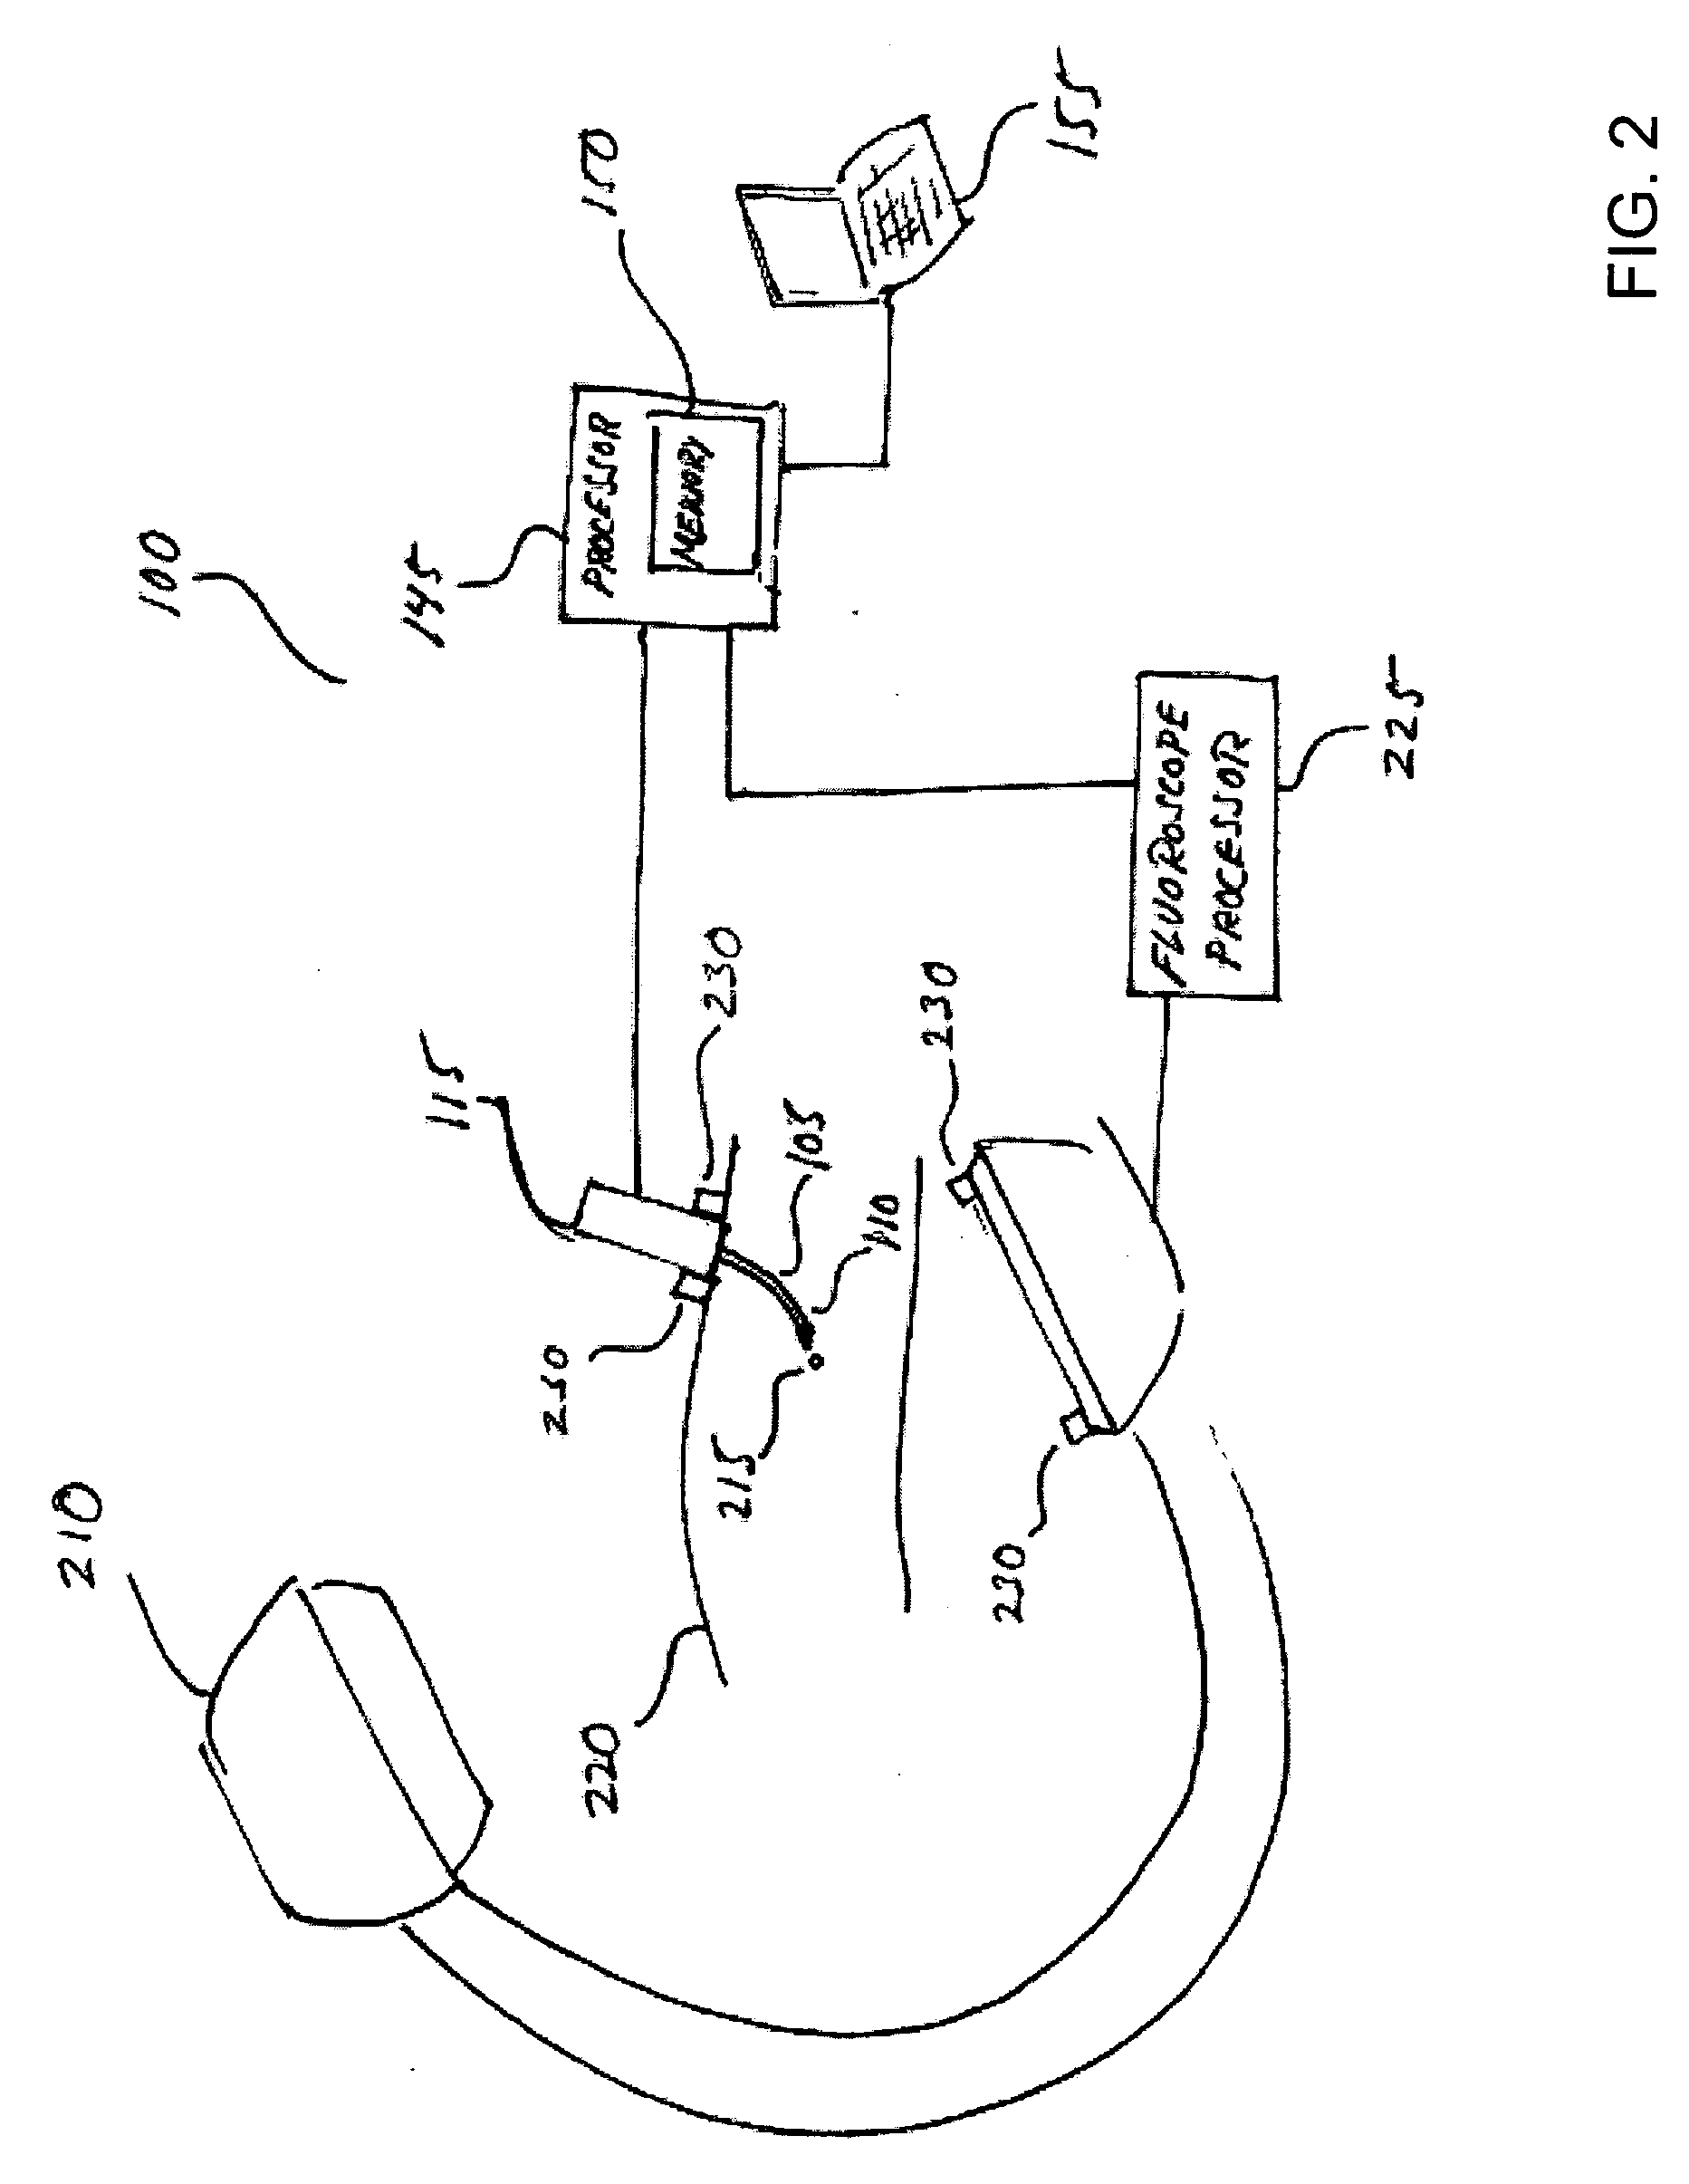 Distal bevel-tip needle control device and algorithm